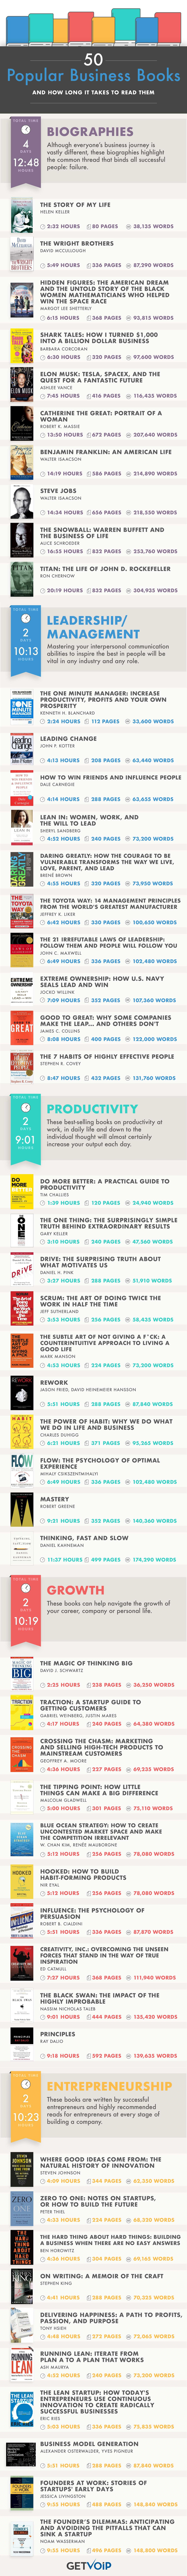 50 popular business books and how long it takes to read